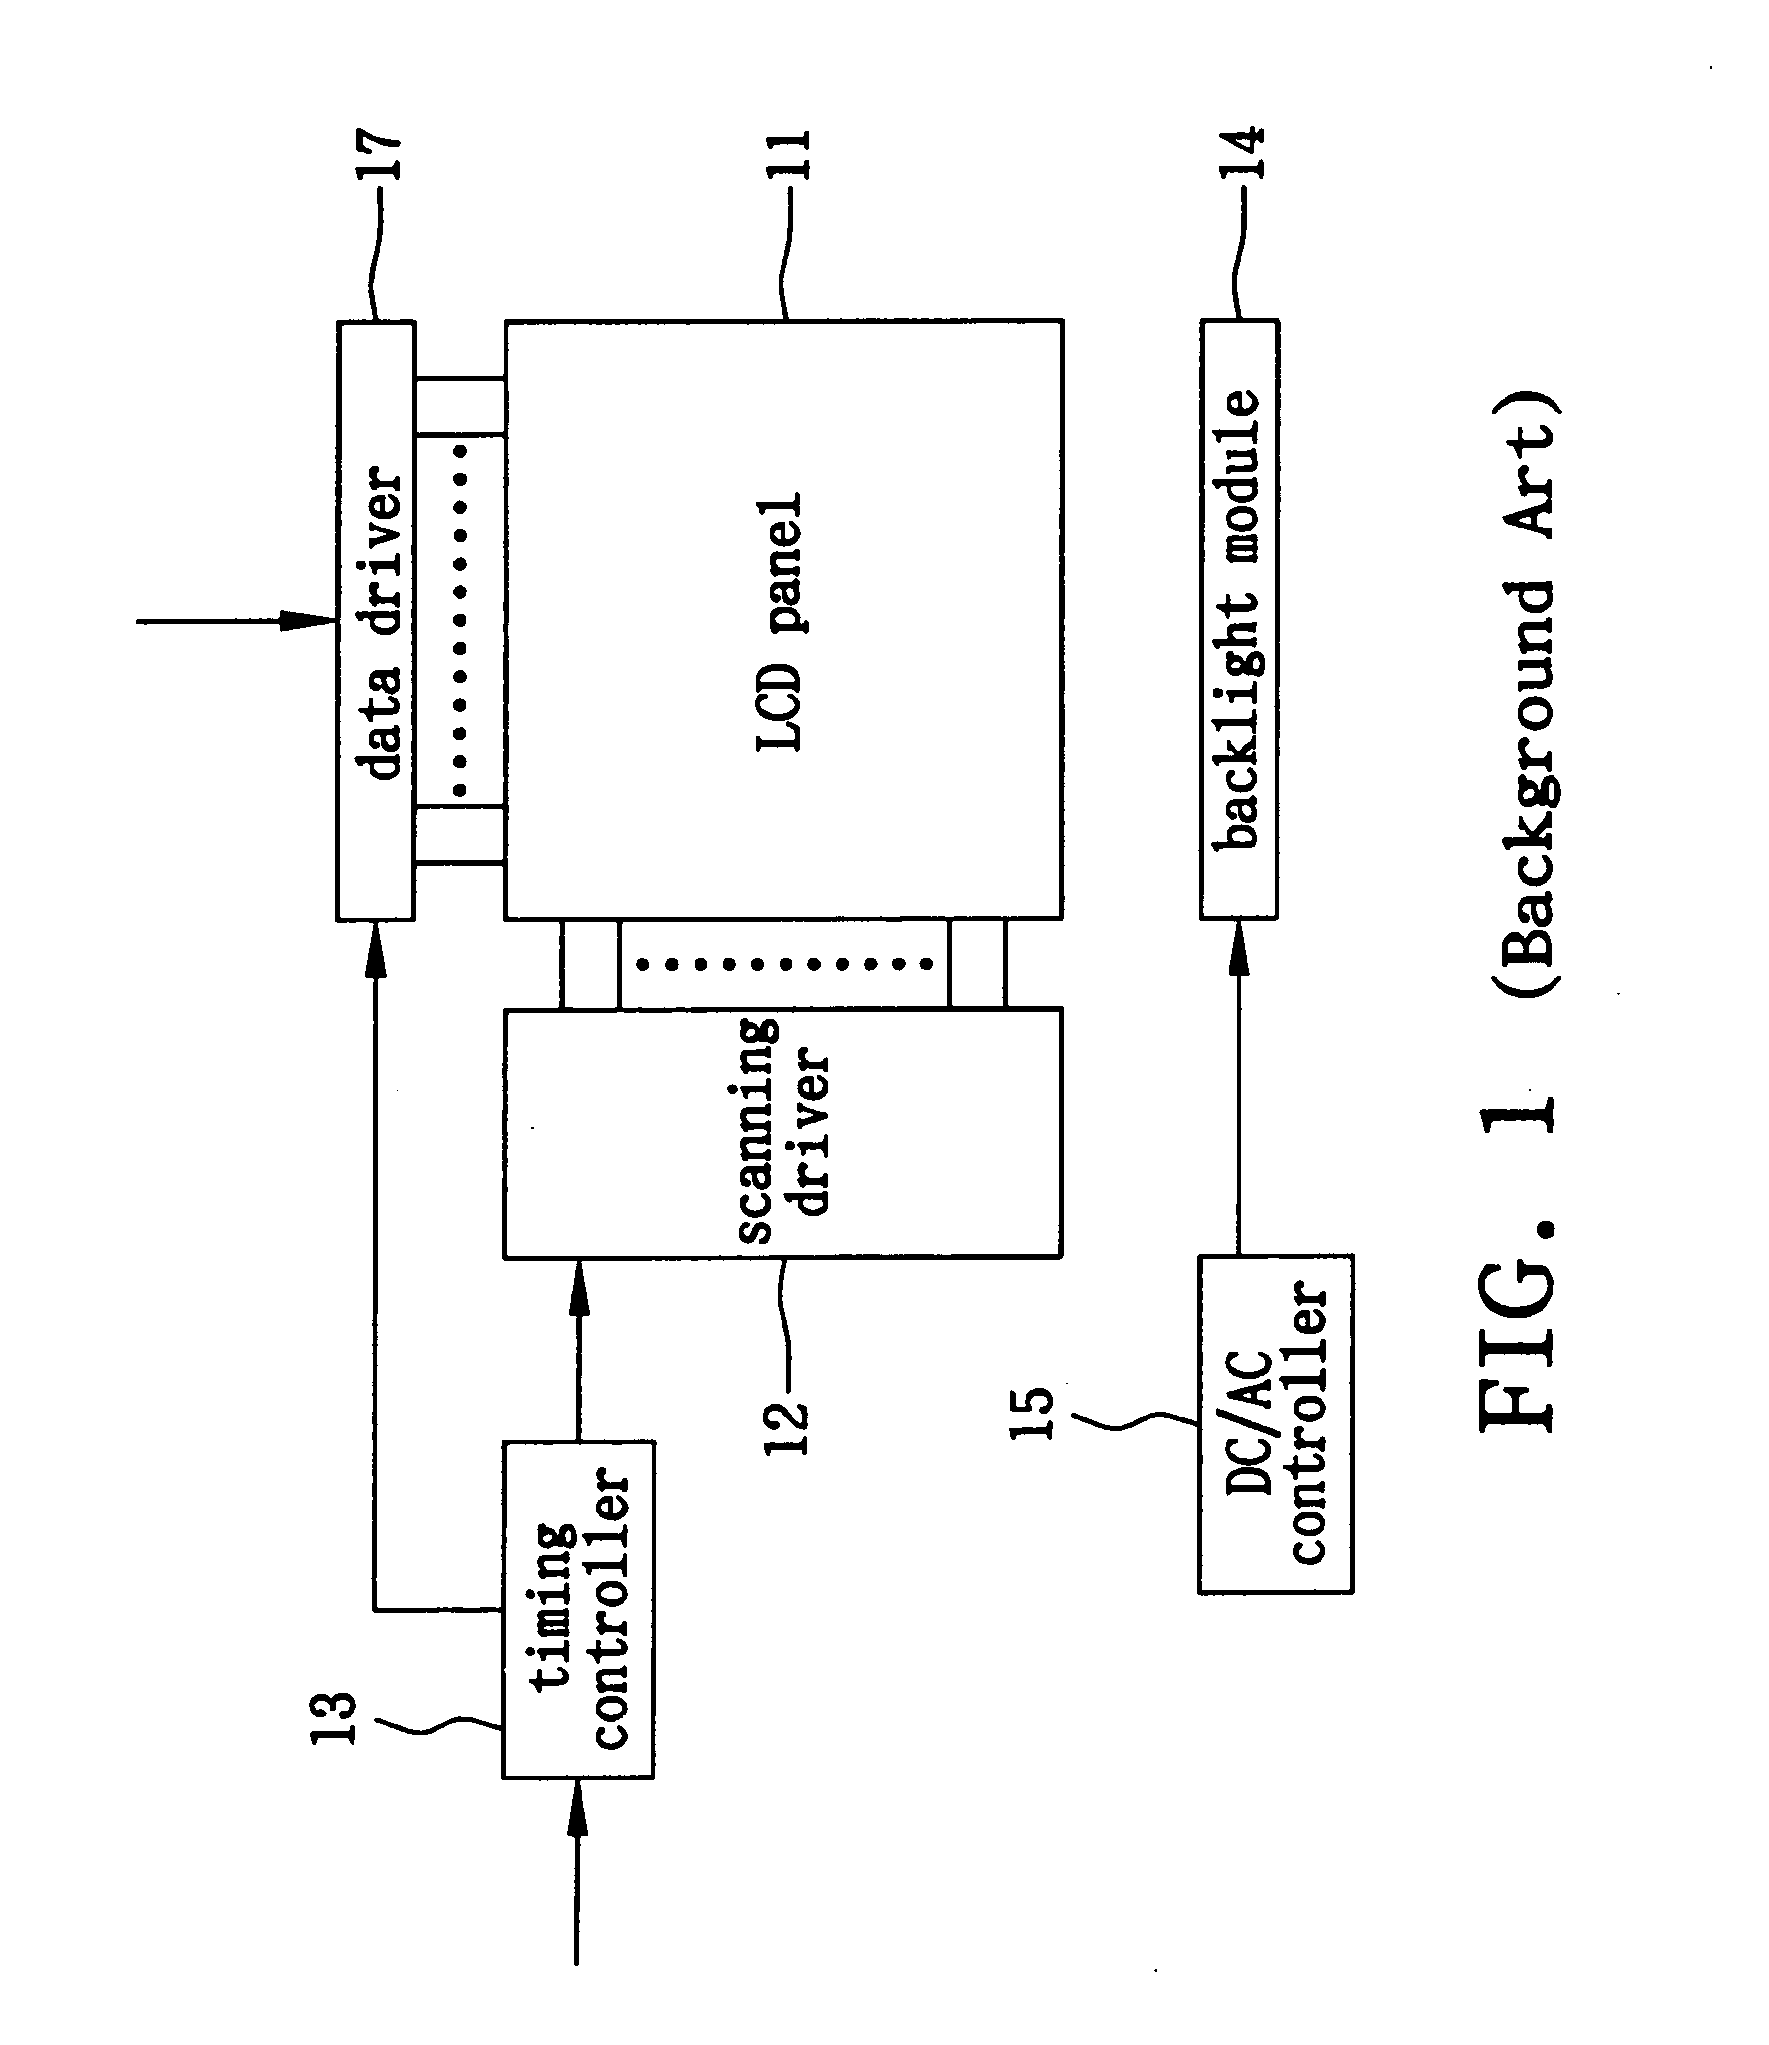 Method for dynamically modulating driving current of backlight module